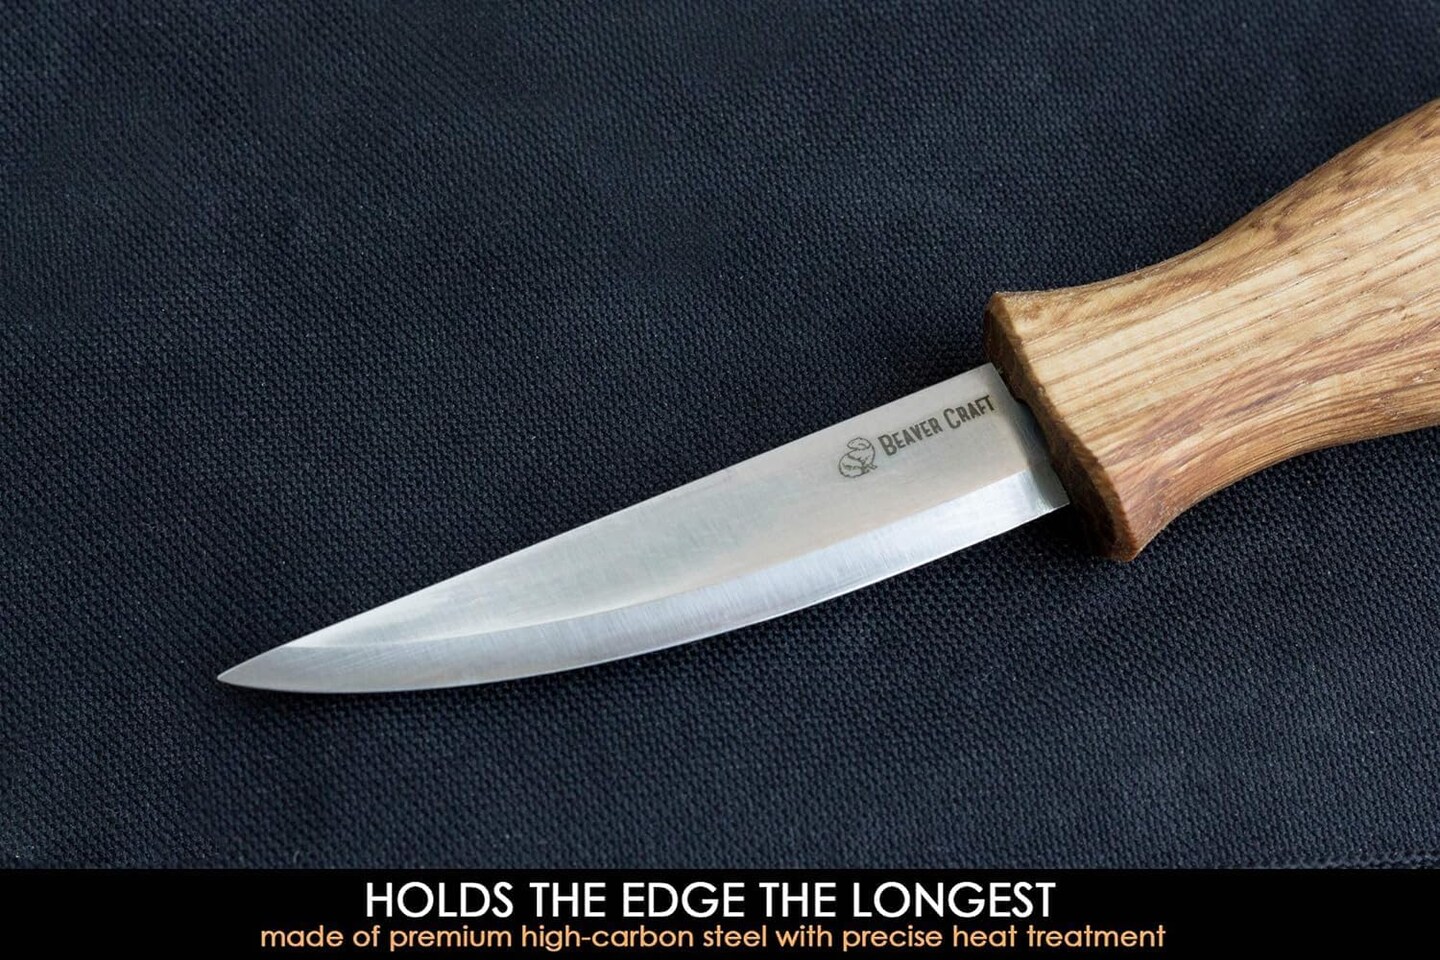 BeaverCraft Wood Carving Knife for Whittling Sloyd Knife C4 3.14&#x22; Wood Whittling Knife for Roughing Wood Carving Chisel Knife for Beginners and Profi - Spoon Carving Tools Knives for Woodworking